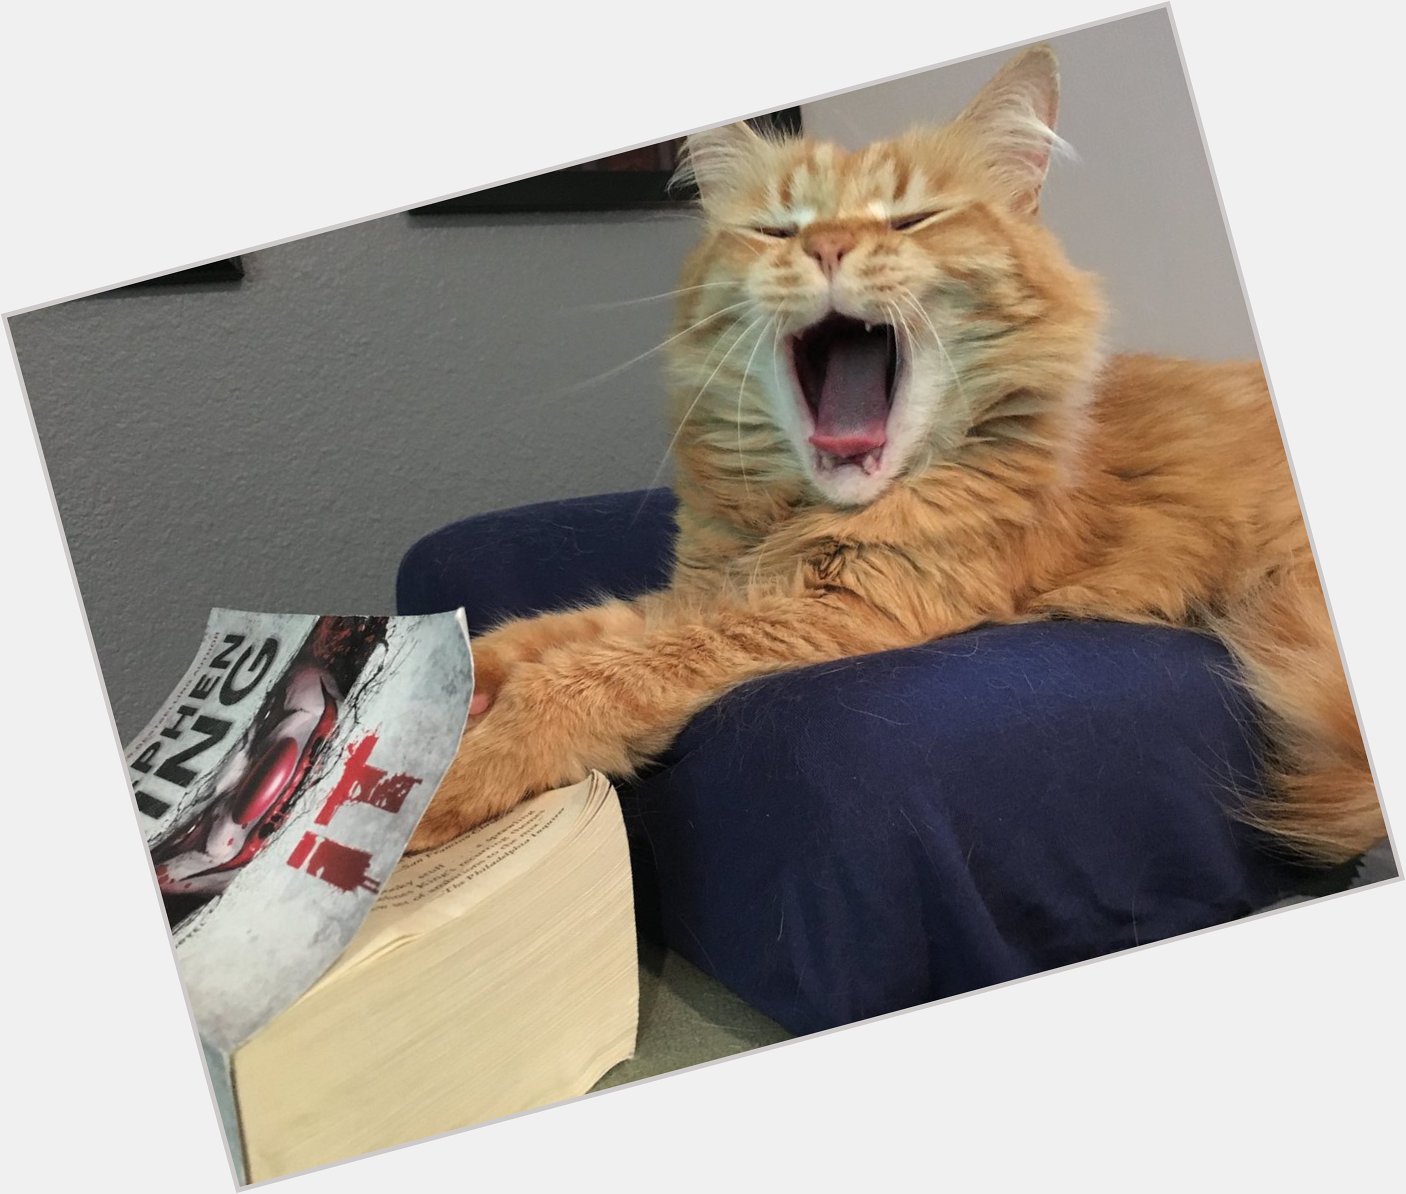 Mr. Marbles Tigerpants wishes a very happy birthday to our favorite author, Stephen King. 